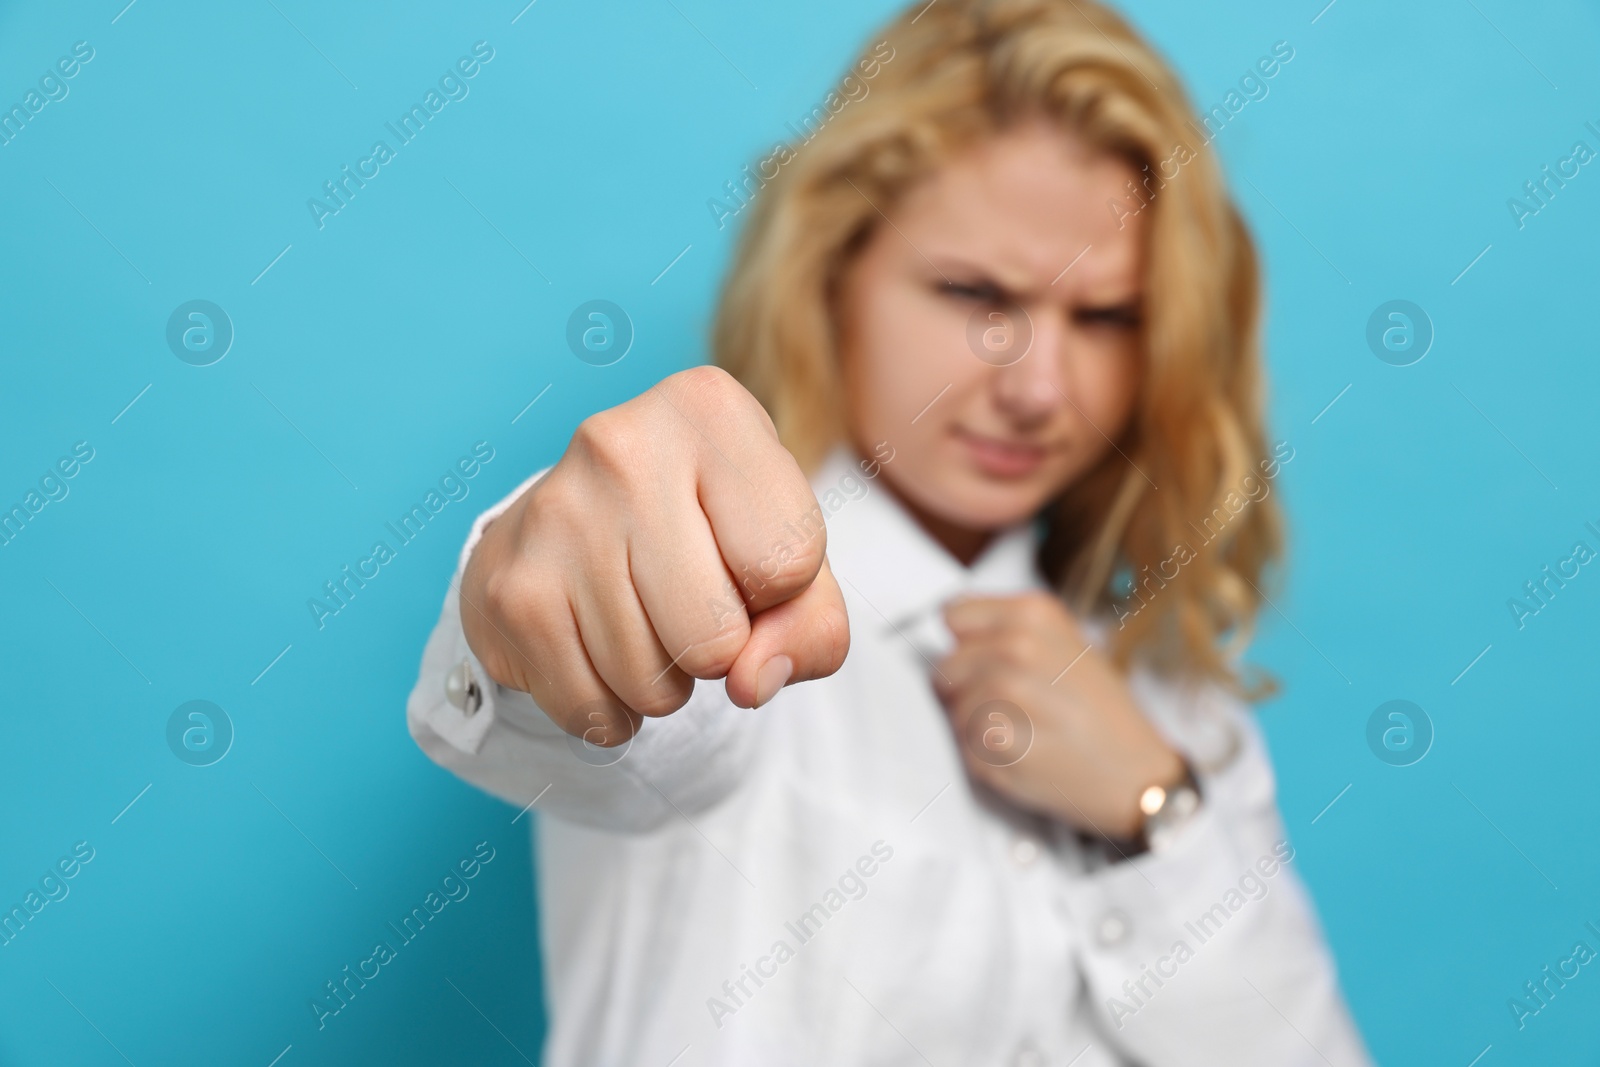 Photo of Young woman ready to fight against light blue background, focus on fist